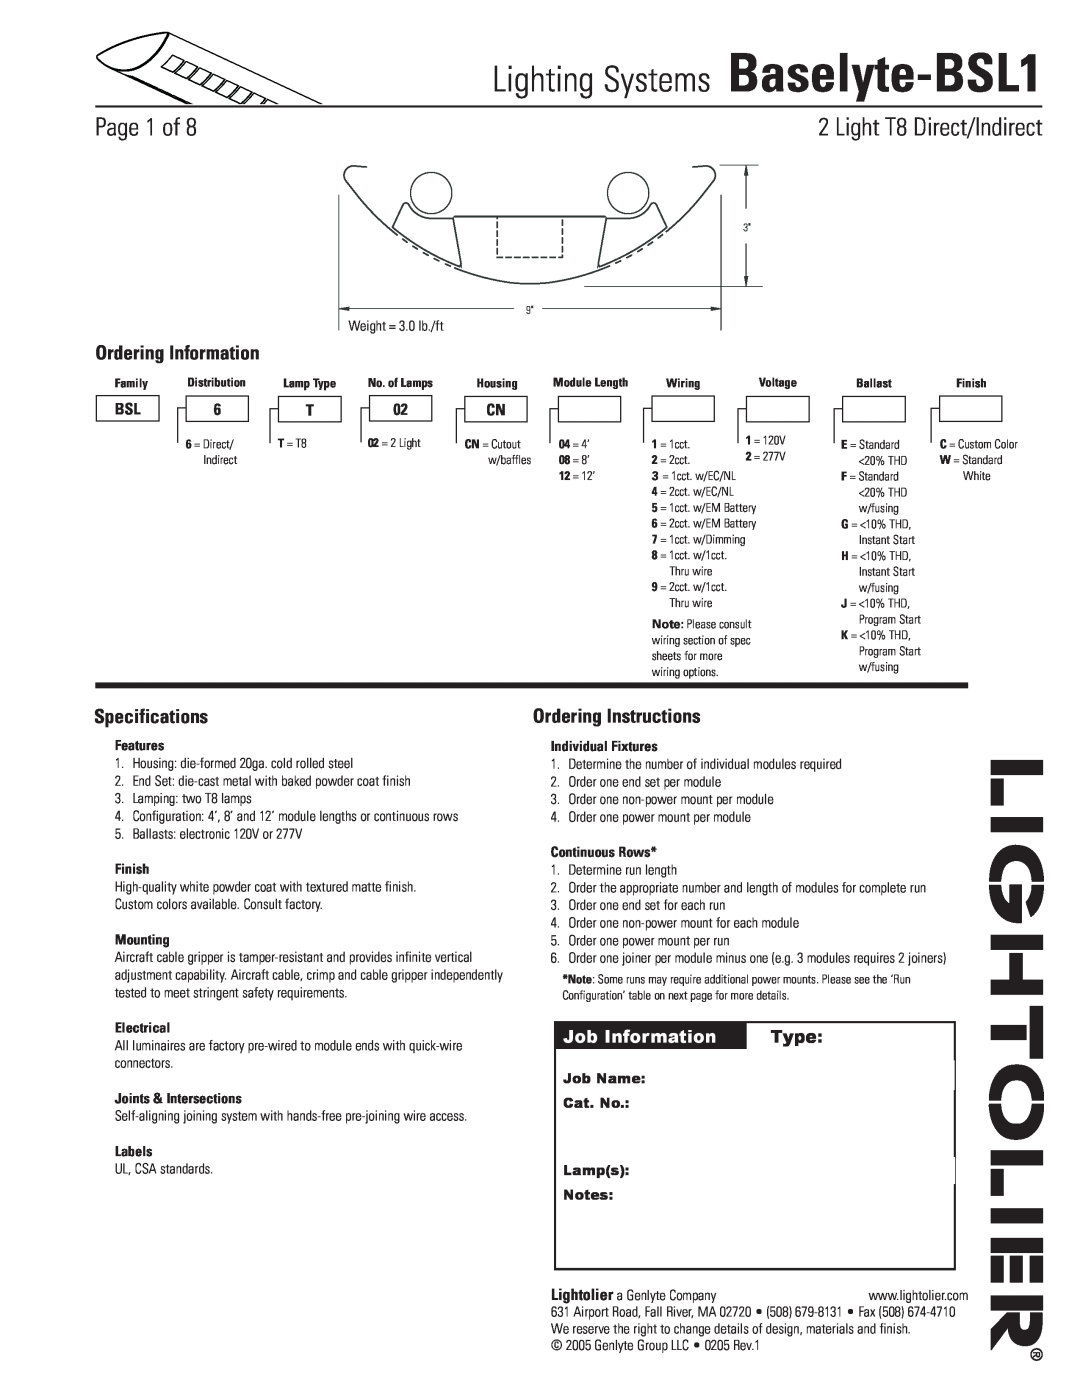 Lightolier specifications Lighting Systems Baselyte-BSL1, Page  of, Light T8 Direct/Indirect, Ordering Information 